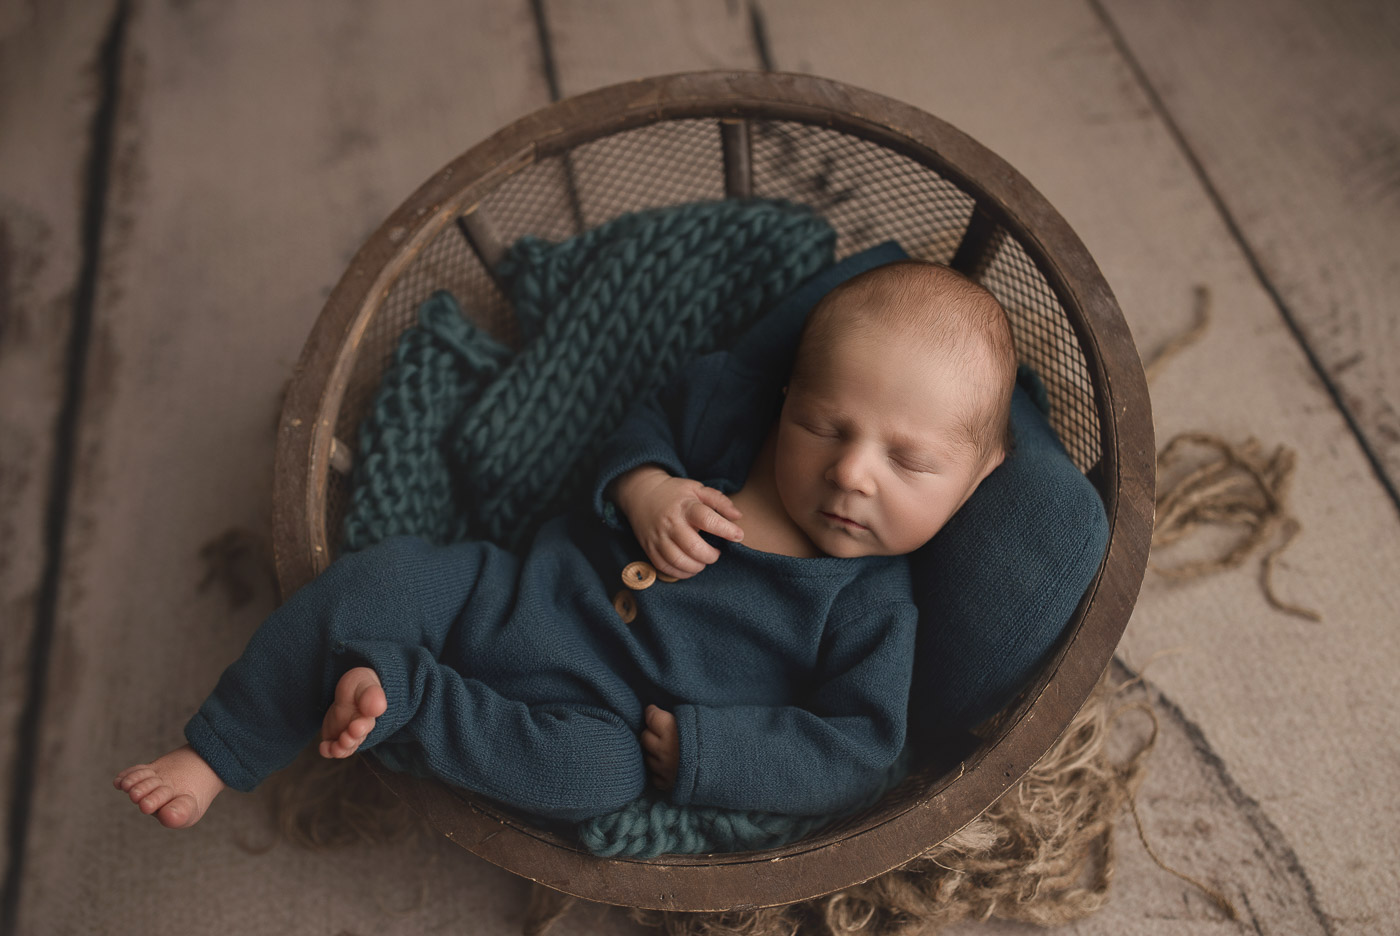 Little baby boy posed in a bowl at his cute newborn session.